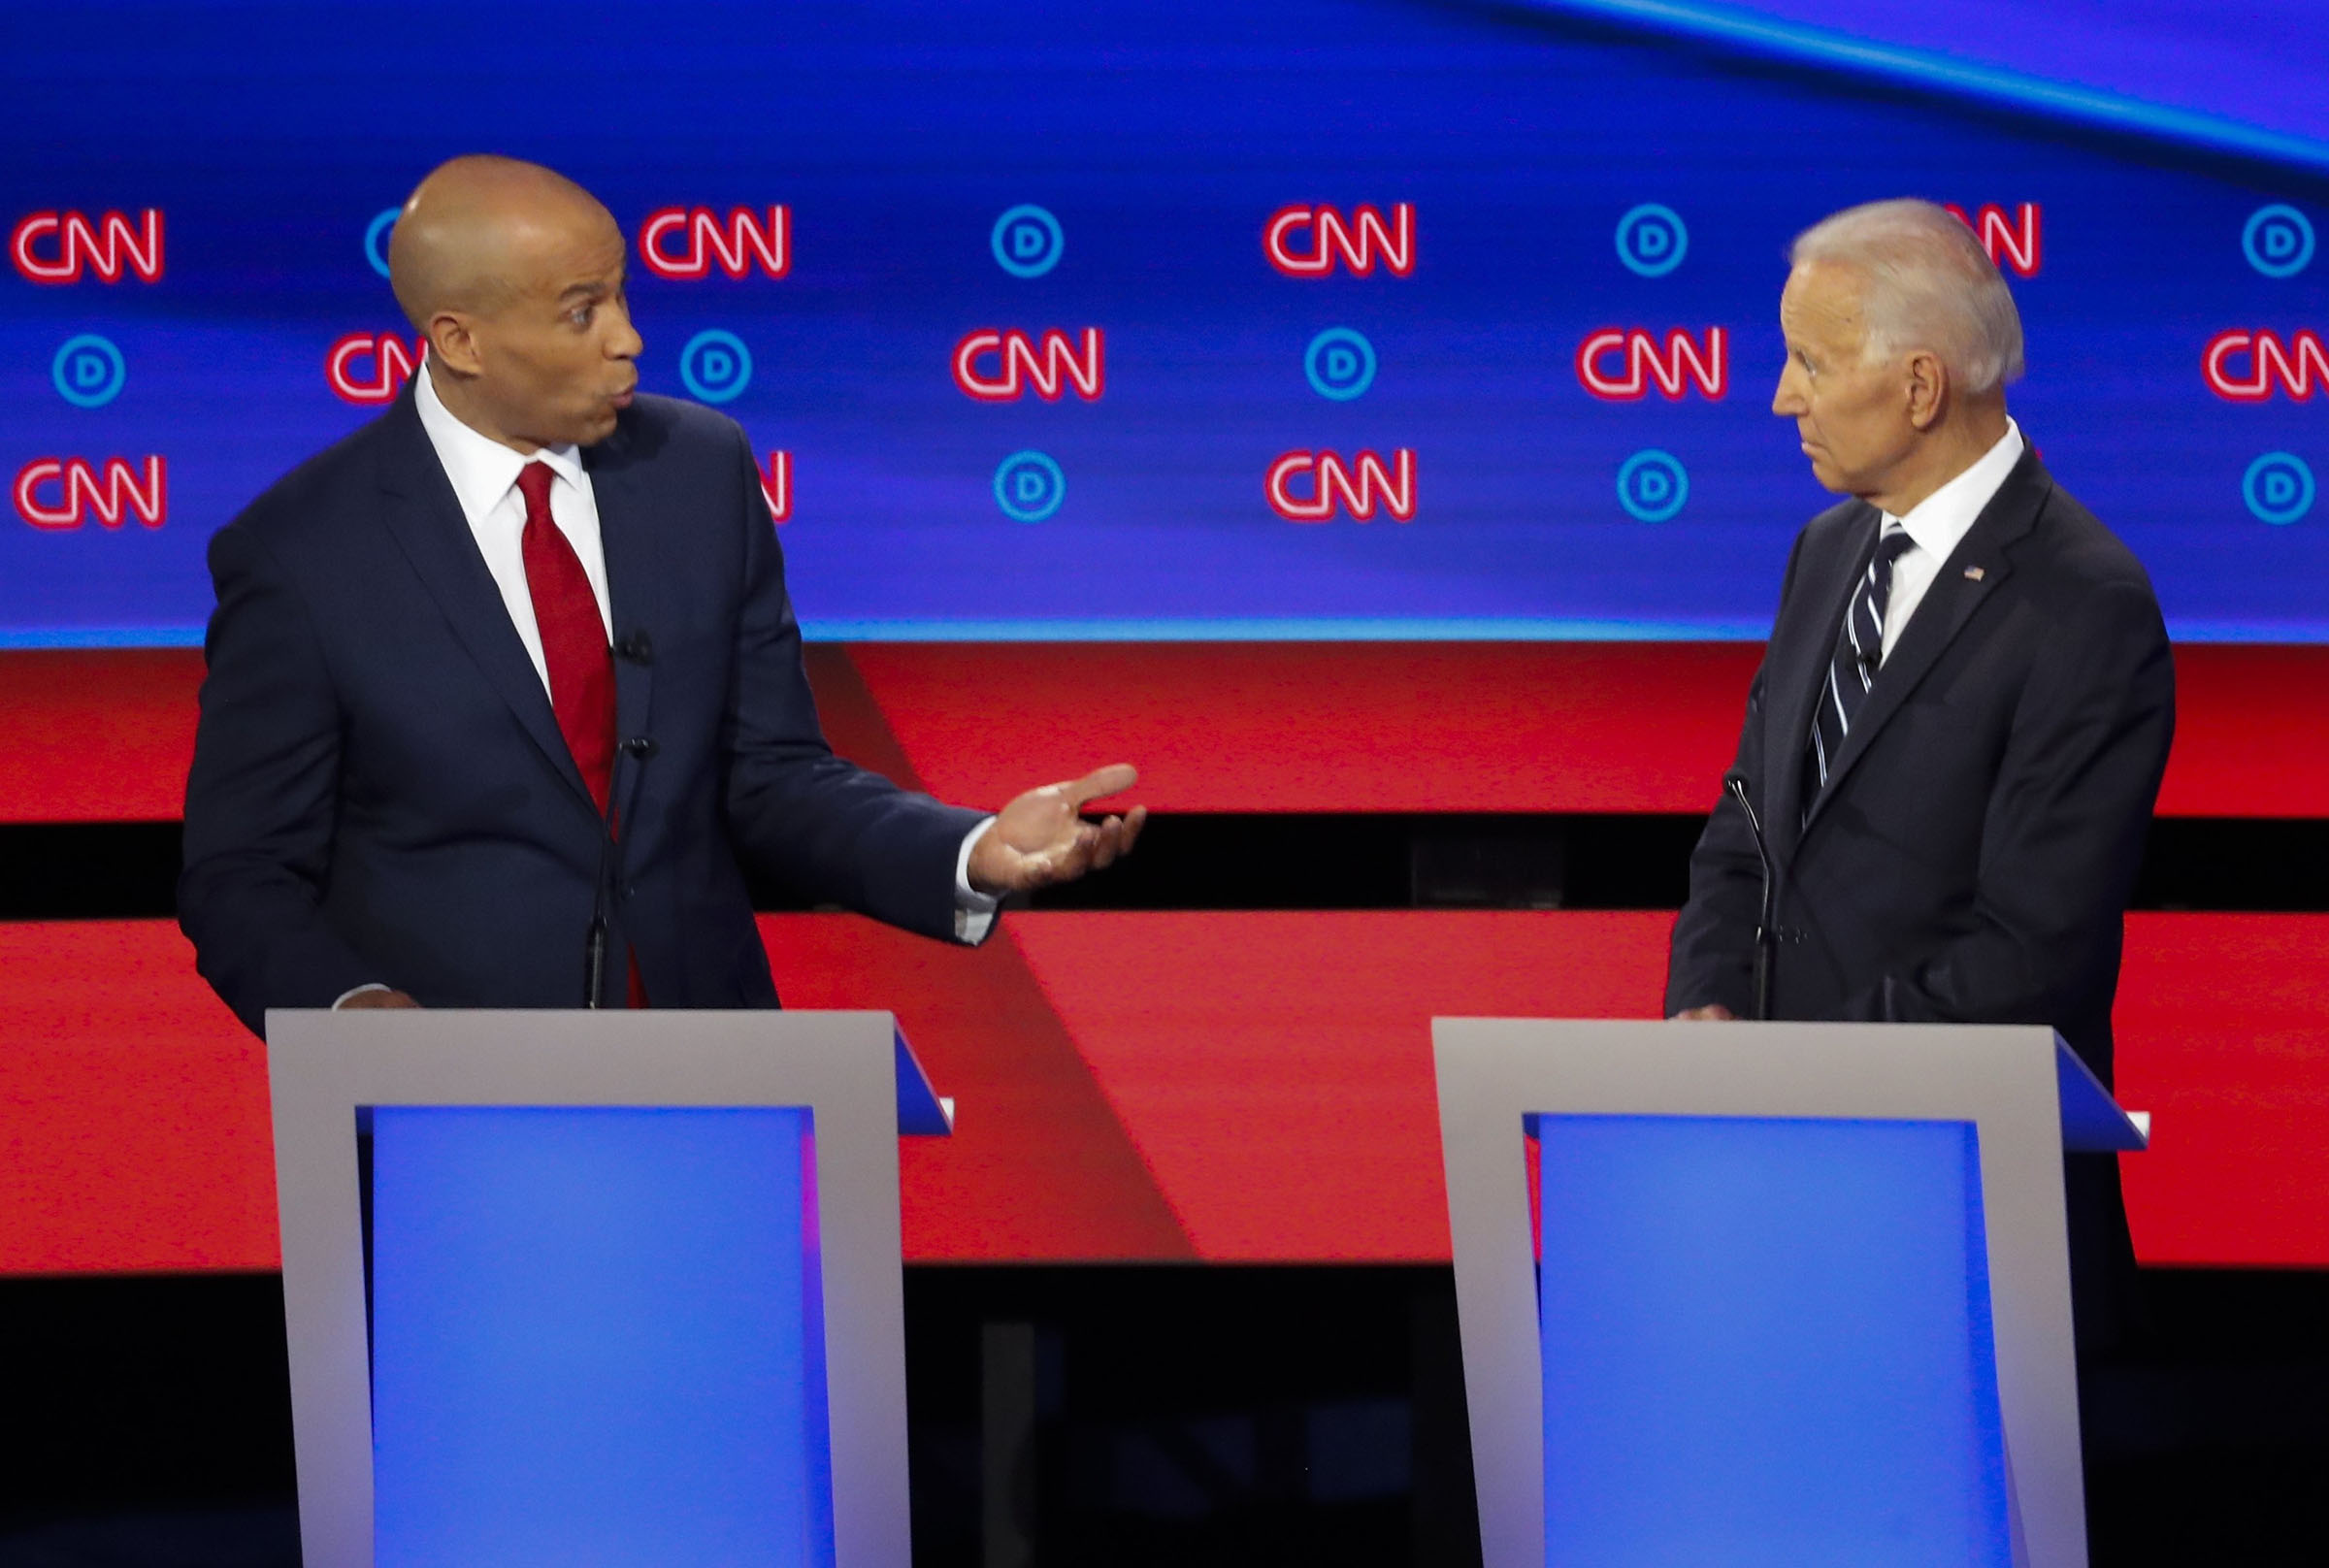 Sen. Cory Booker, D-N.J., speaks to former Vice President Joe Biden as they participate in the second of two Democratic presidential primary debates hosted by CNN Wednesday, July 31, 2019, in the Fox Theatre in Detroit. (Paul Sancya—AP)